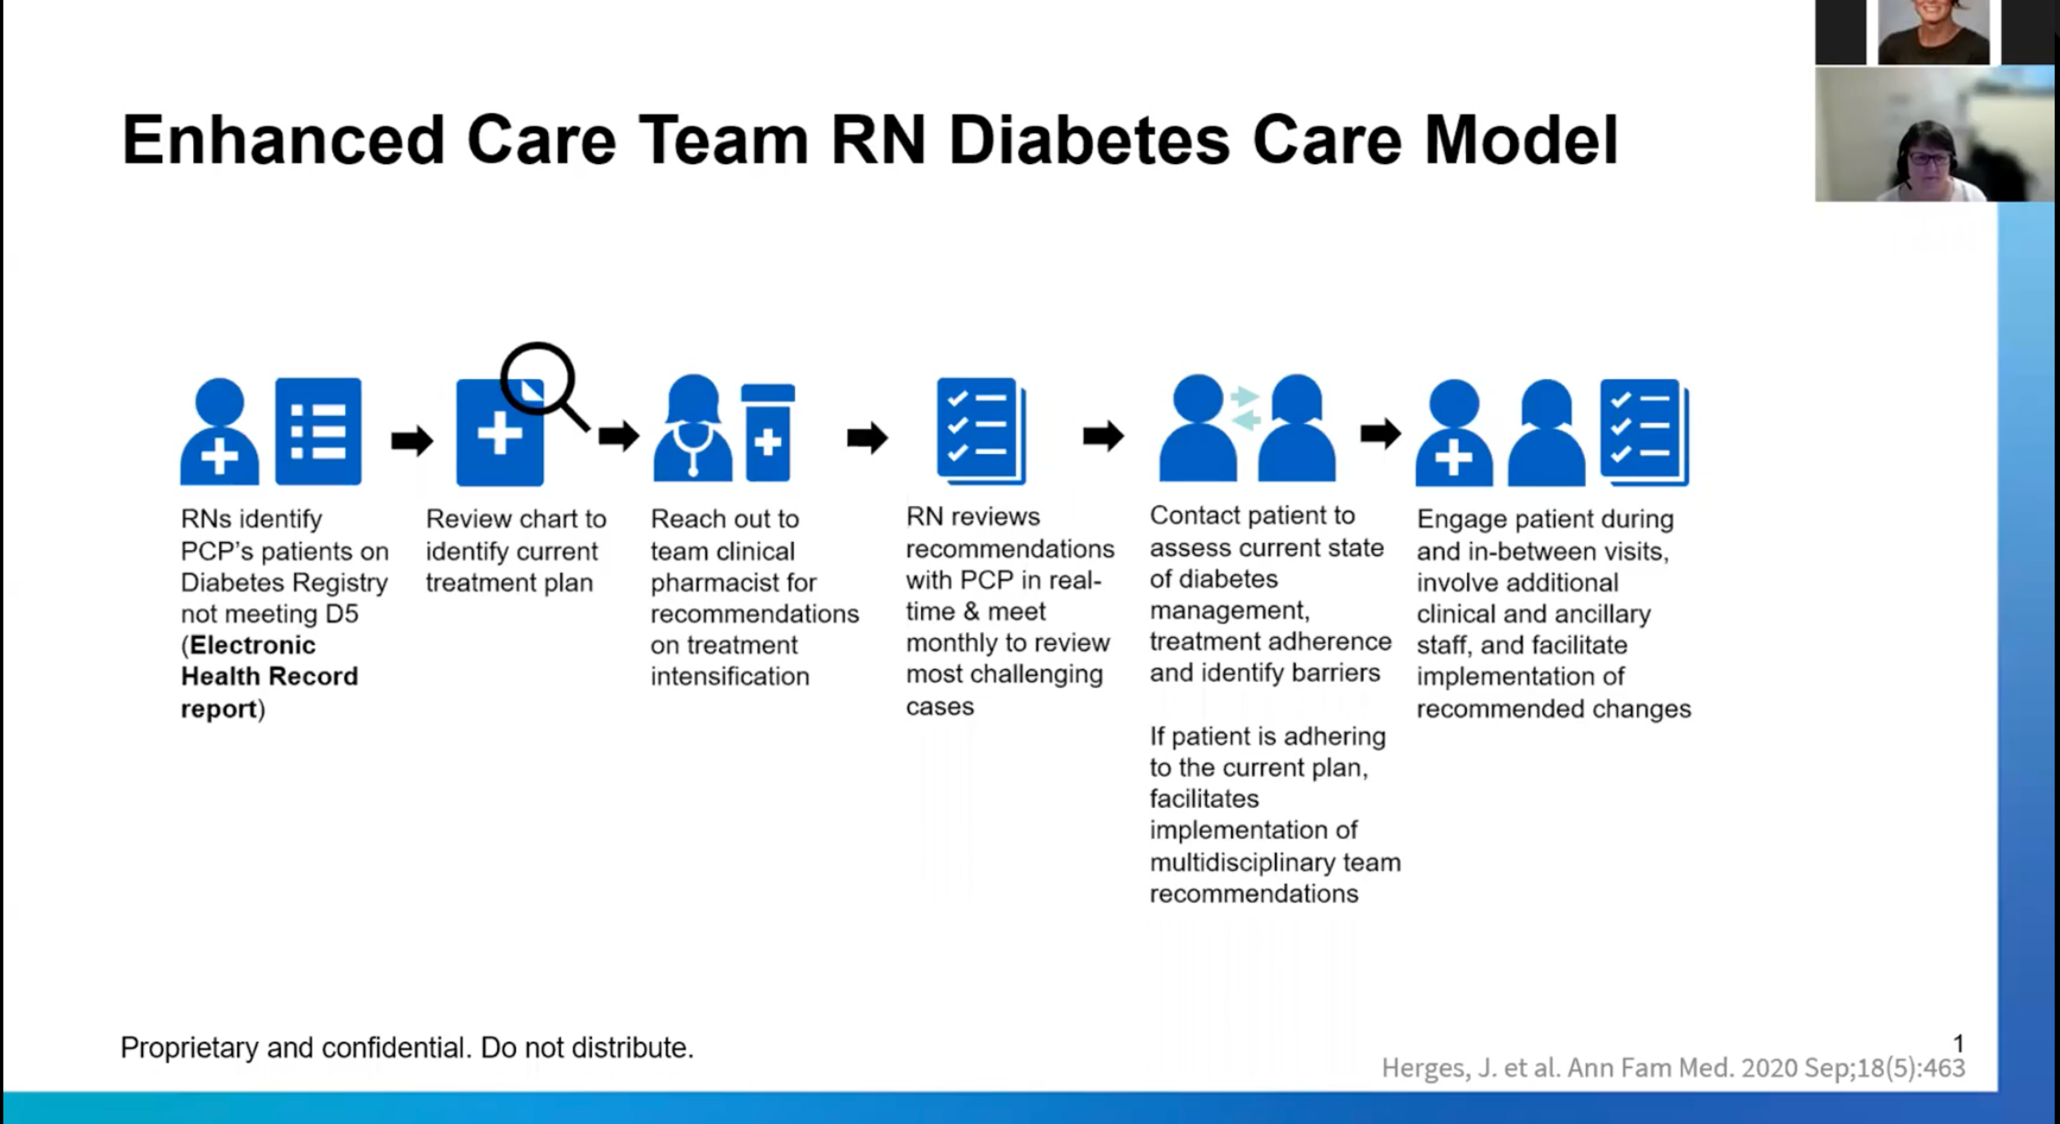 Nurse Sensitive Interventions Play a Key Role In Improving Diabetes Care and Quality Outcomes